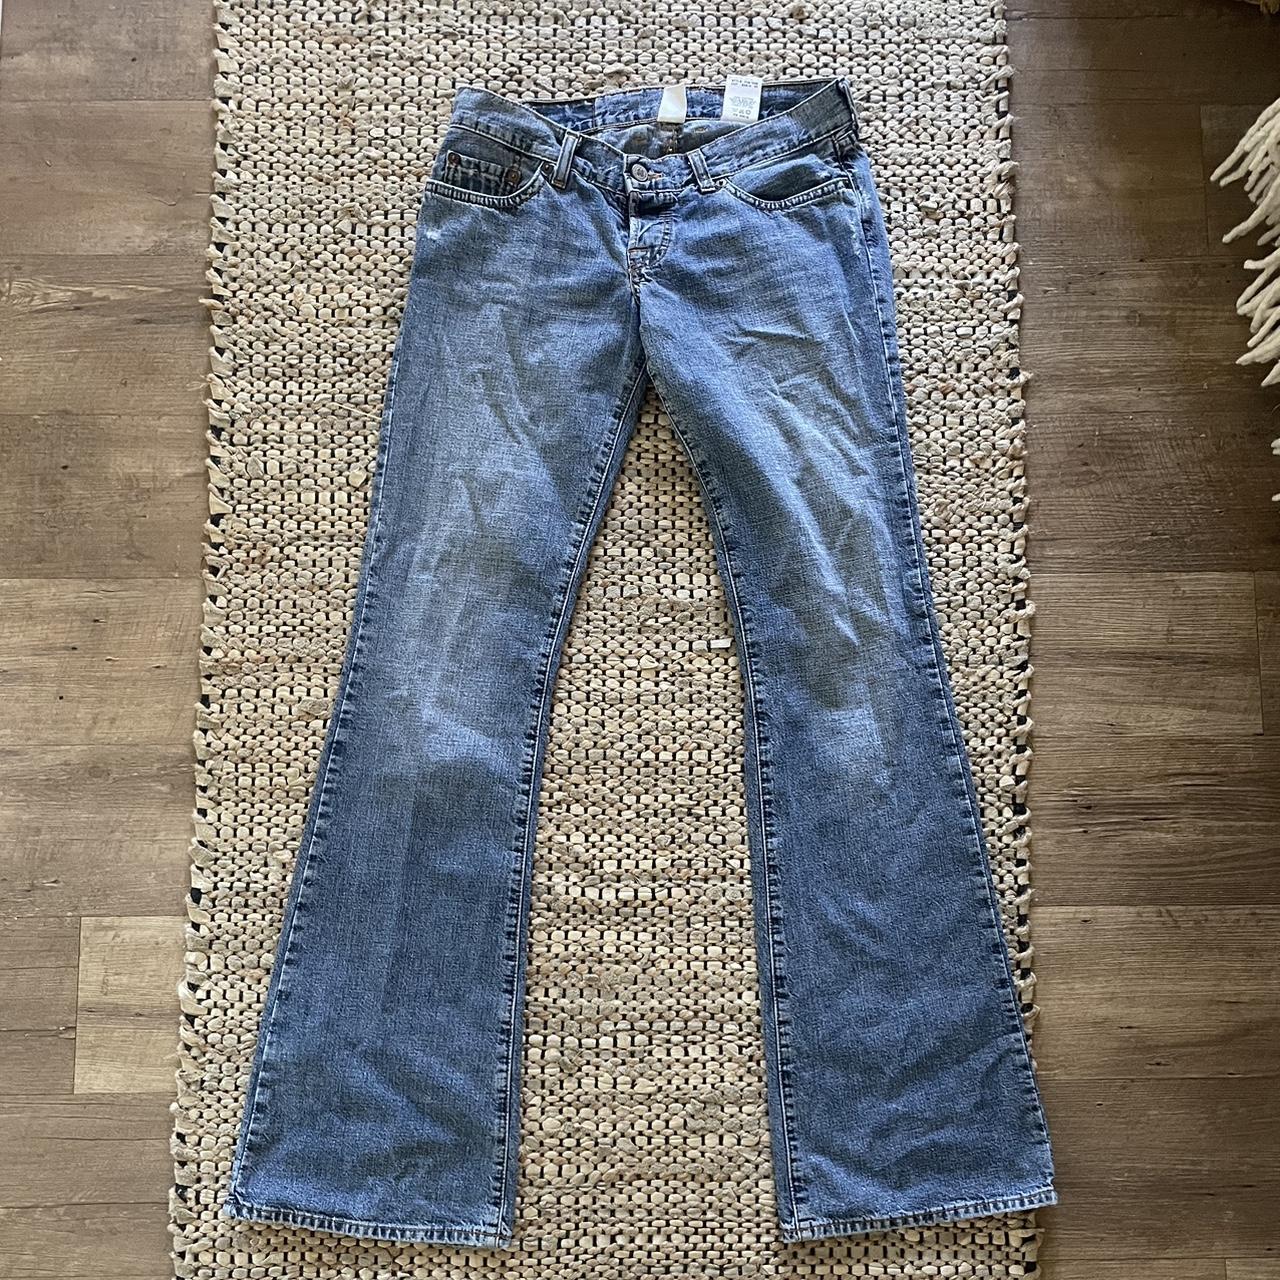 Vintage lucky dungaree brand jeans from the Y2K - Depop